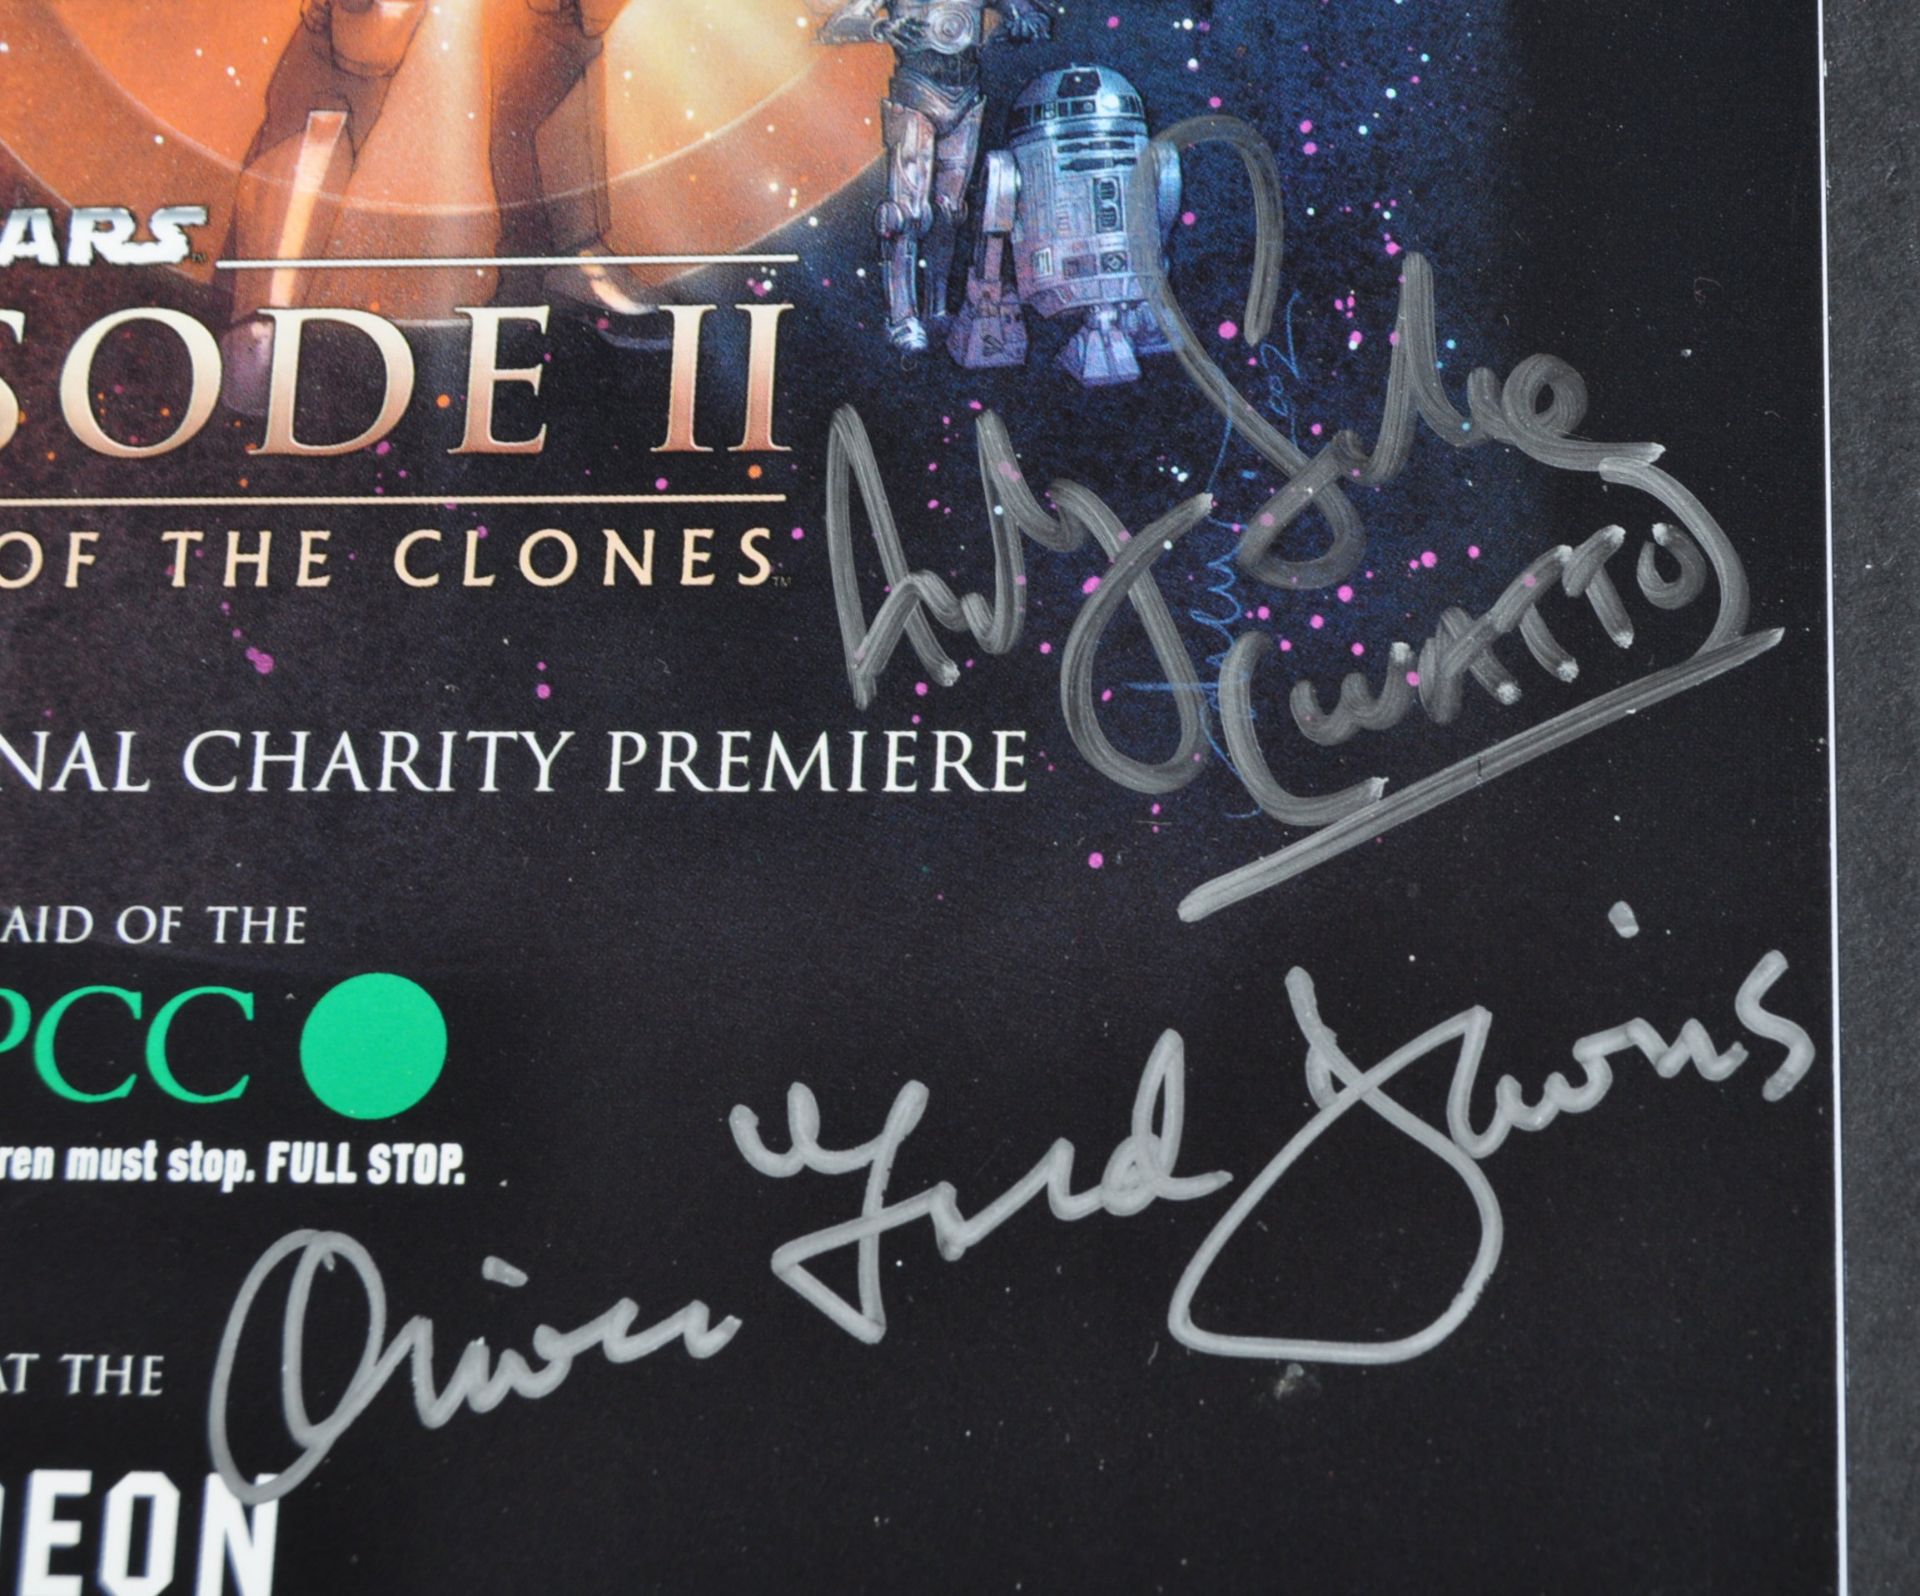 STAR WARS - ATTACK OF THE CLONES - SIGNED PREMIERE BROCHURE - Image 2 of 4